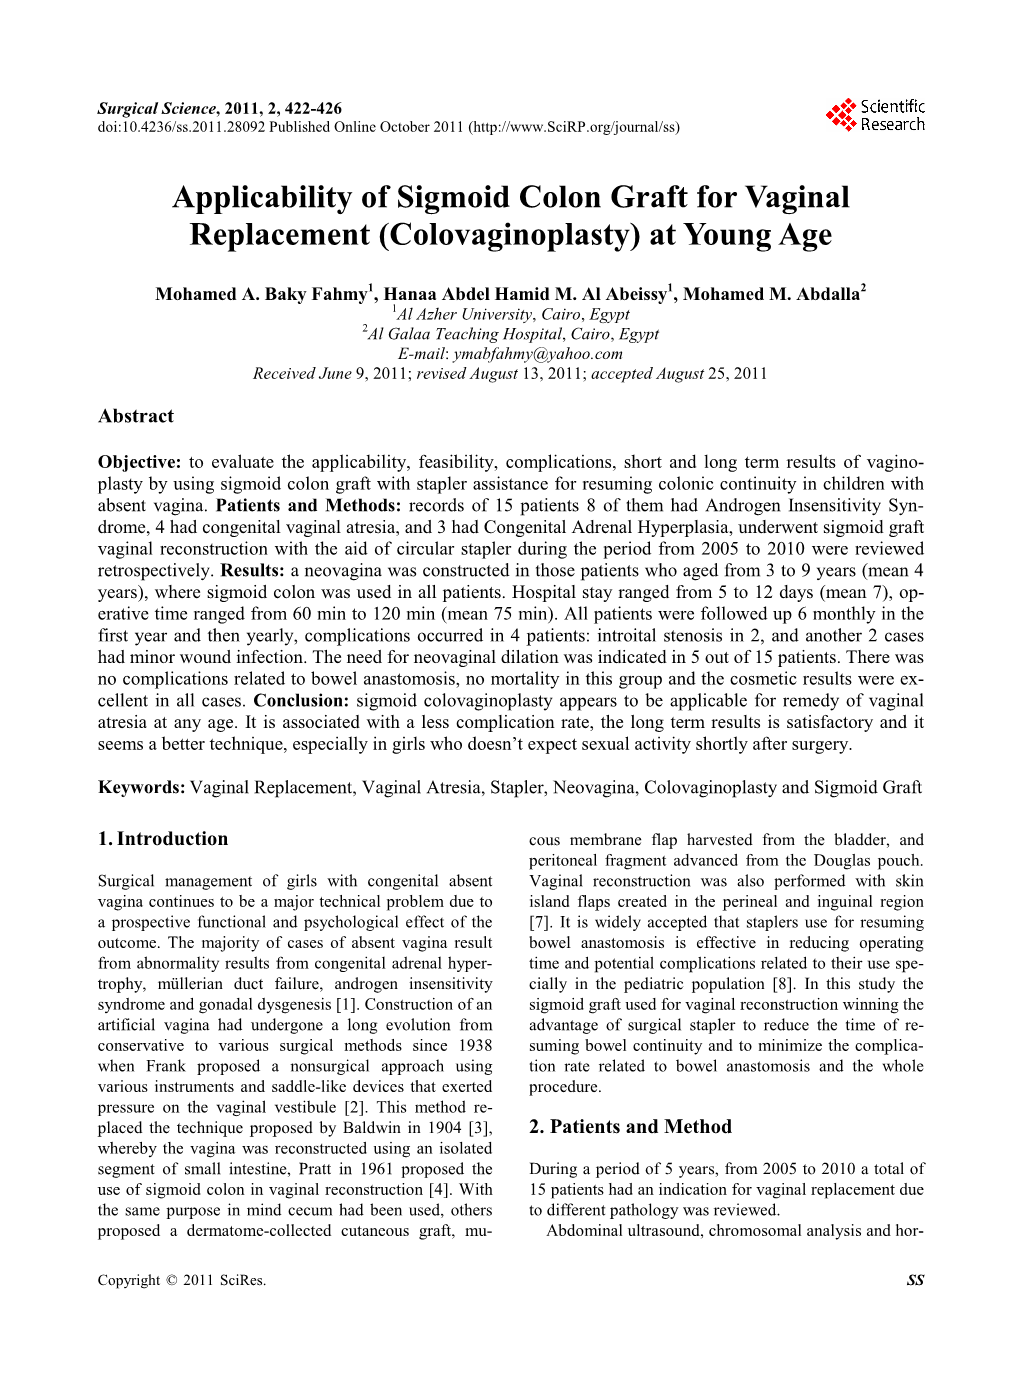 Applicability of Sigmoid Colon Graft for Vaginal Replacement (Colovaginoplasty) at Young Age